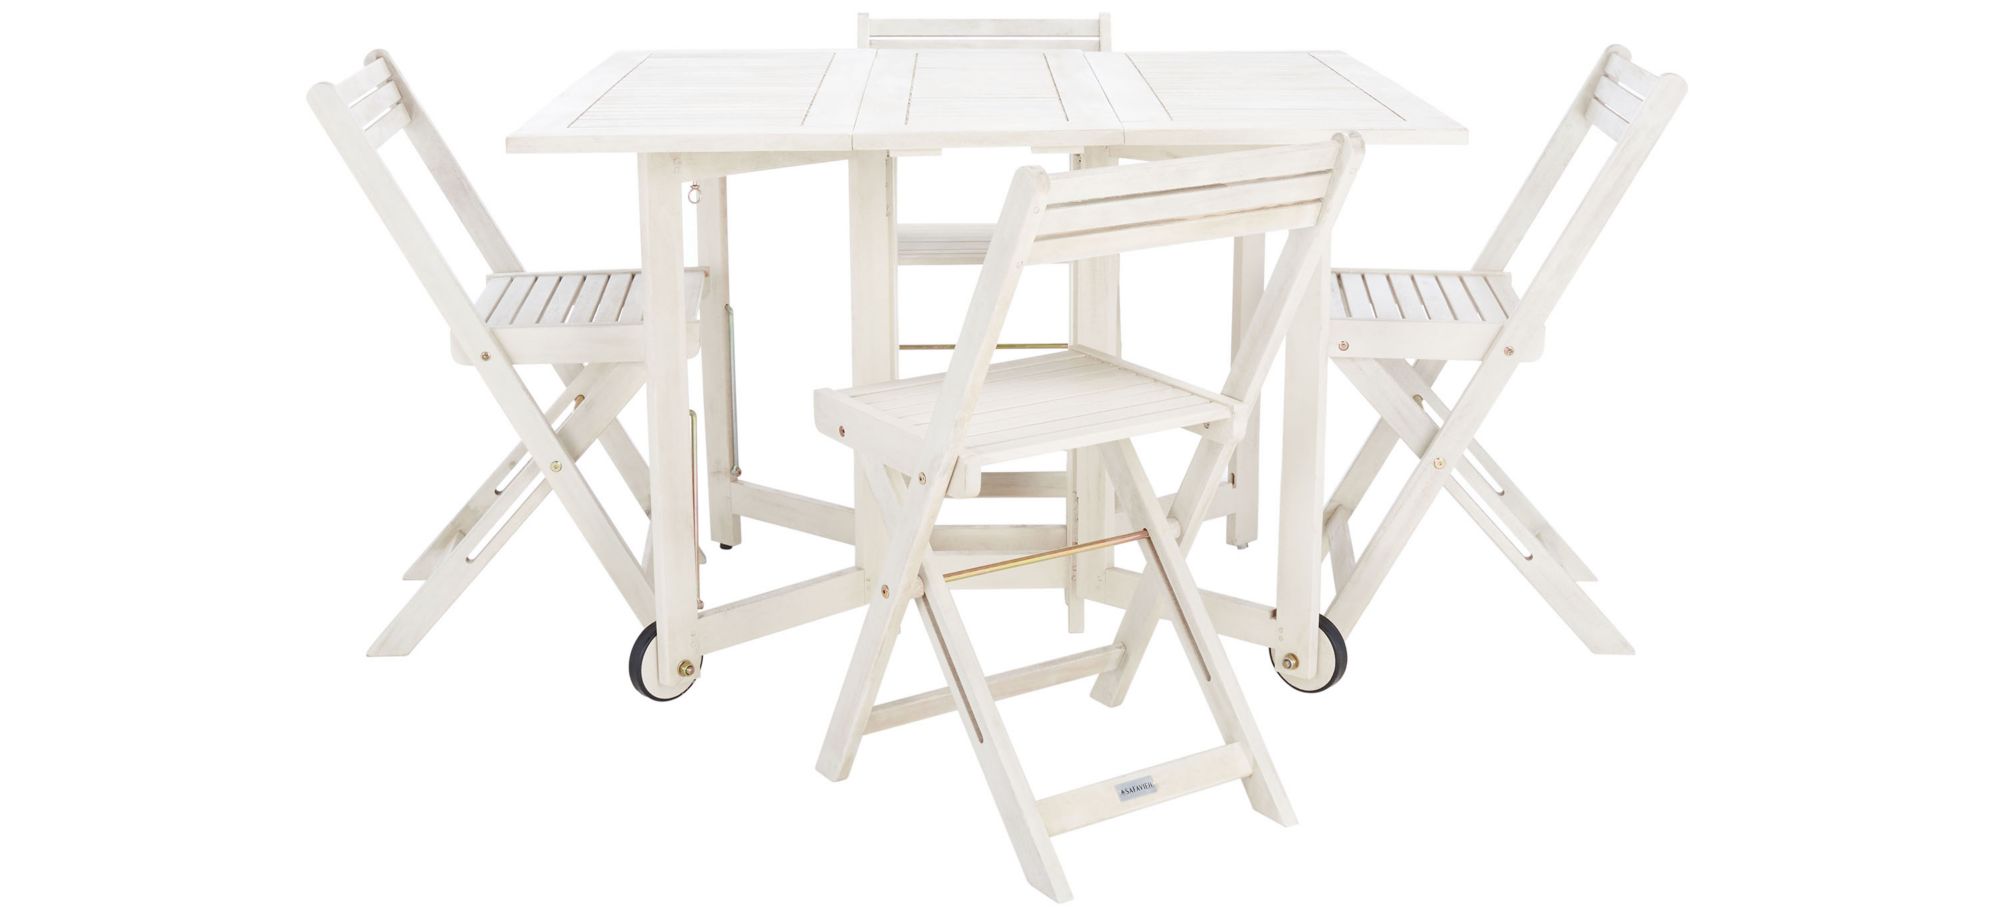 Nasya 5-pc. Outdoor Cabinet Dining Set in White by Safavieh